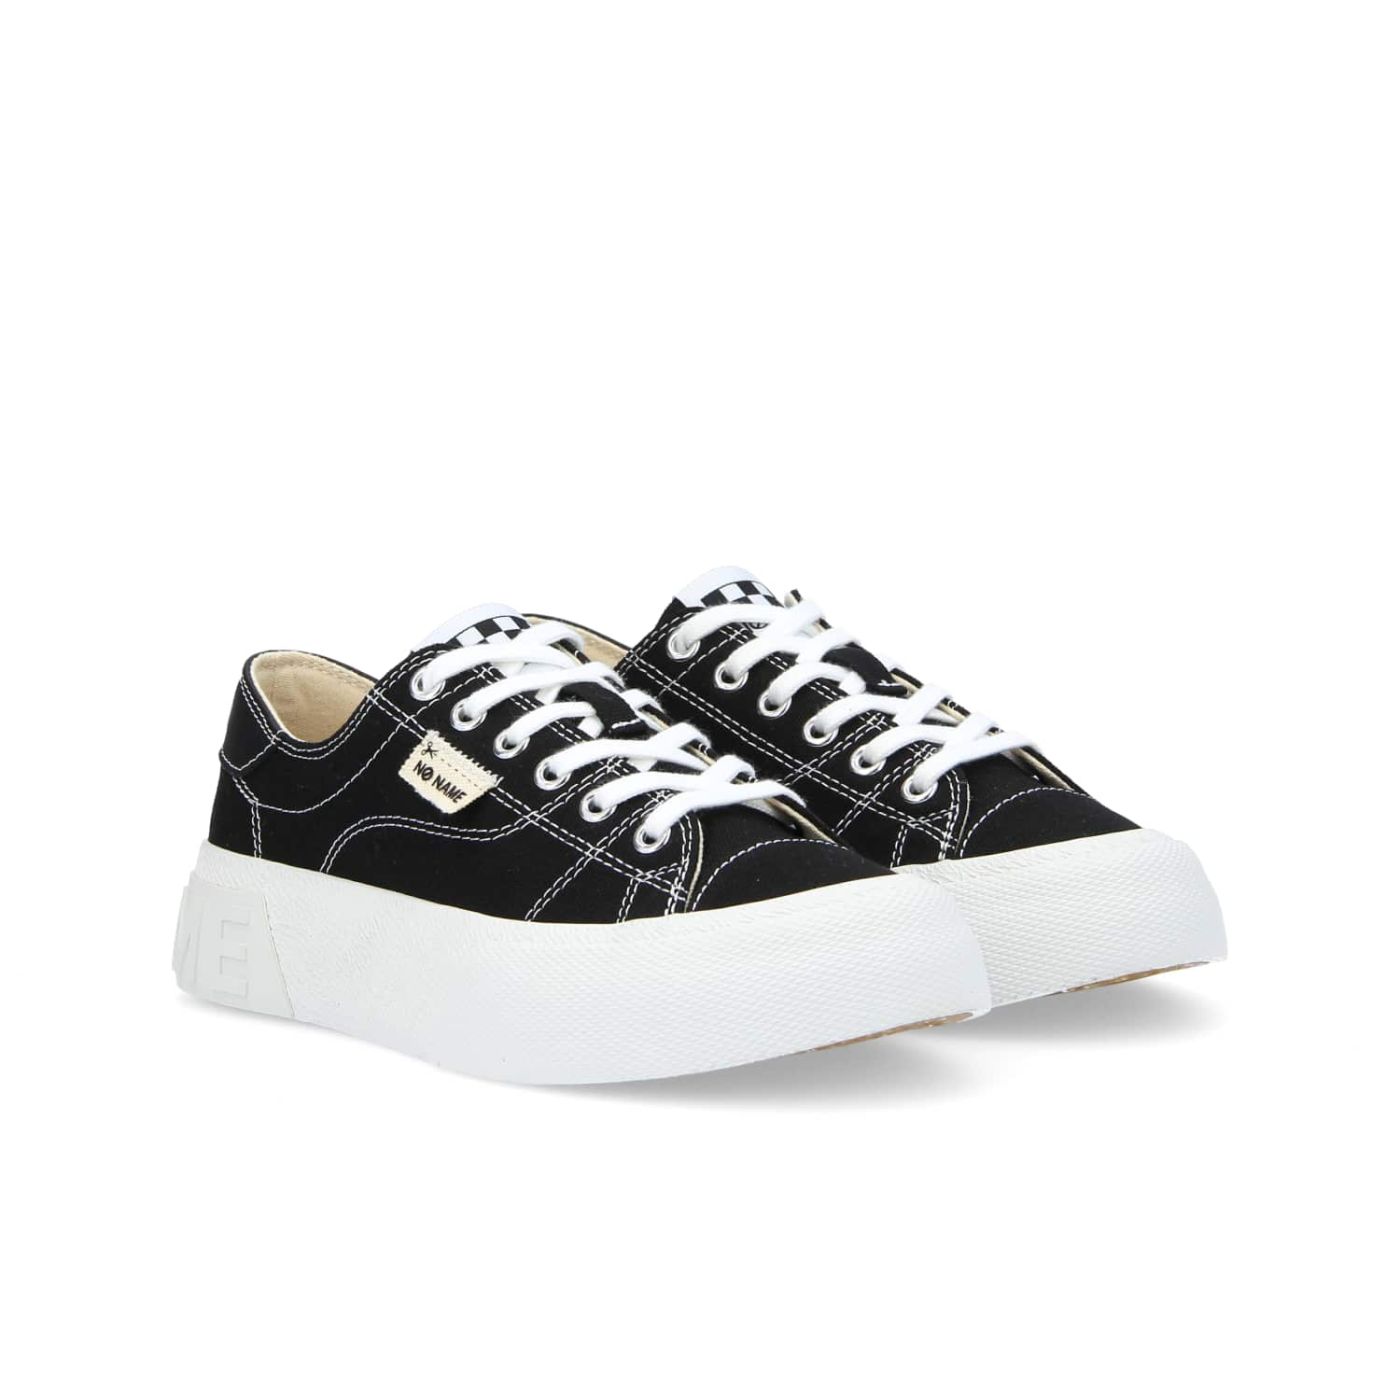 RESET SNEAKER W - CANVAS RECYCLED - BLACK/STITCH WHITE